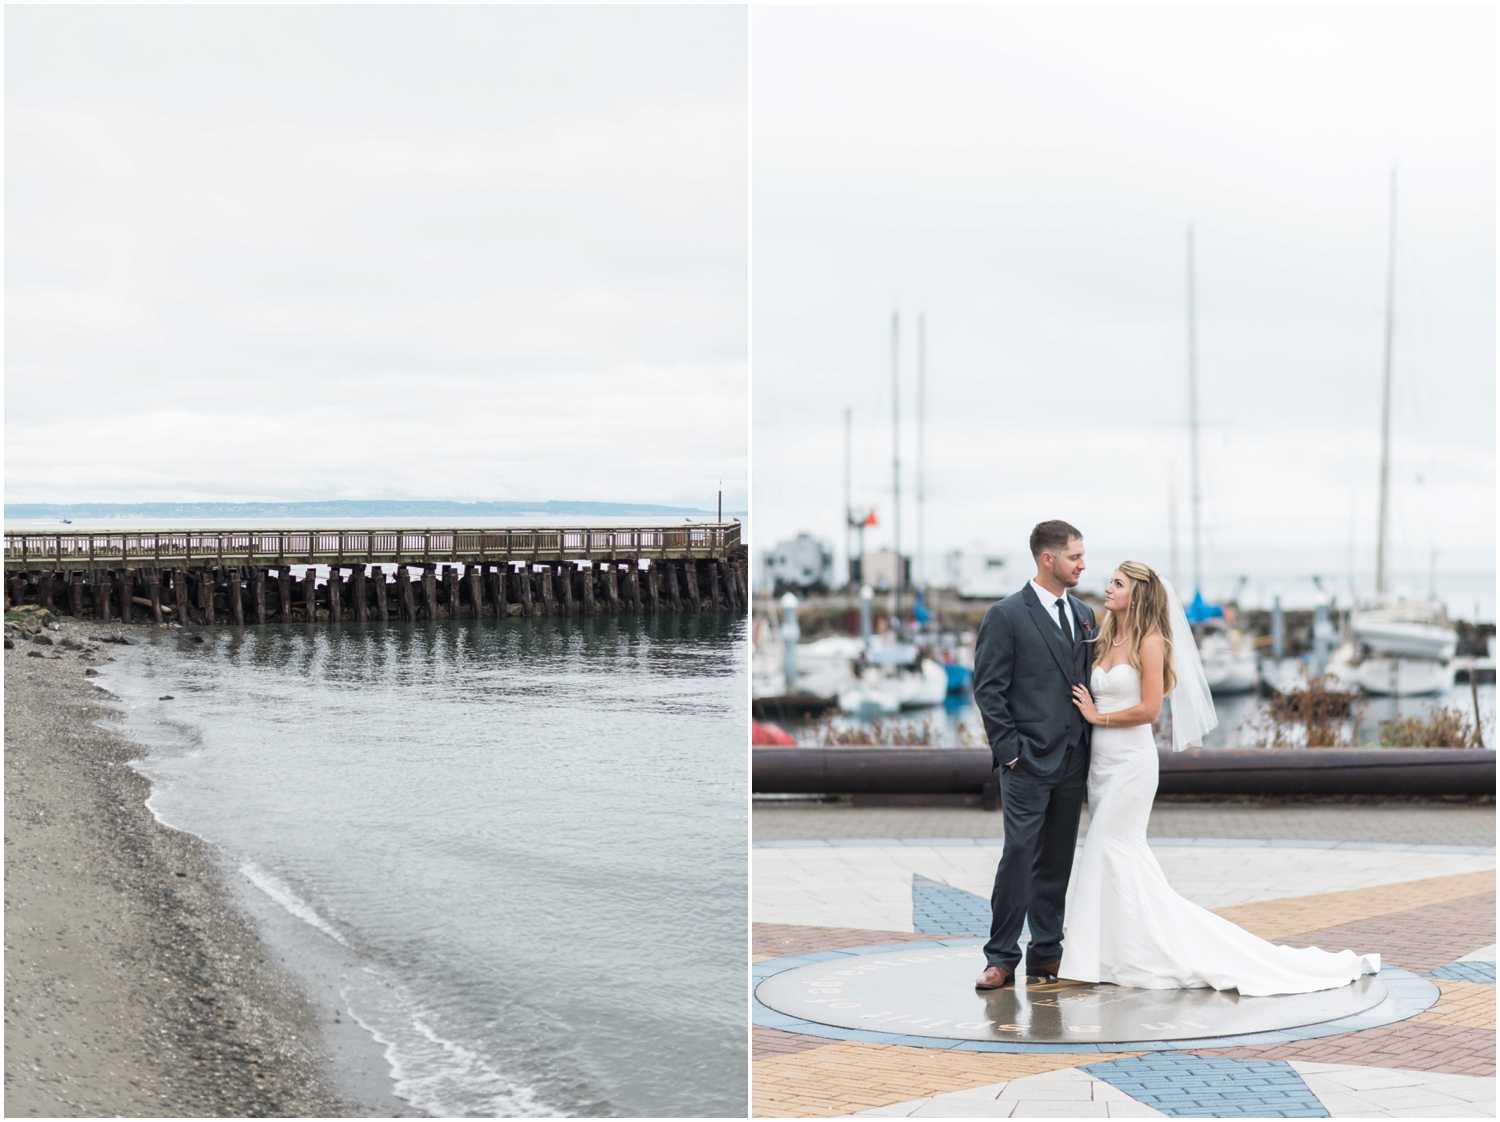 Chris & Laurens Nautical Port Townsend Wedding. Fall.  Old vintage Wooden Boats. Driftwood. Sand. Pre-Ceremony cocktails. Chalkboard Signs. 